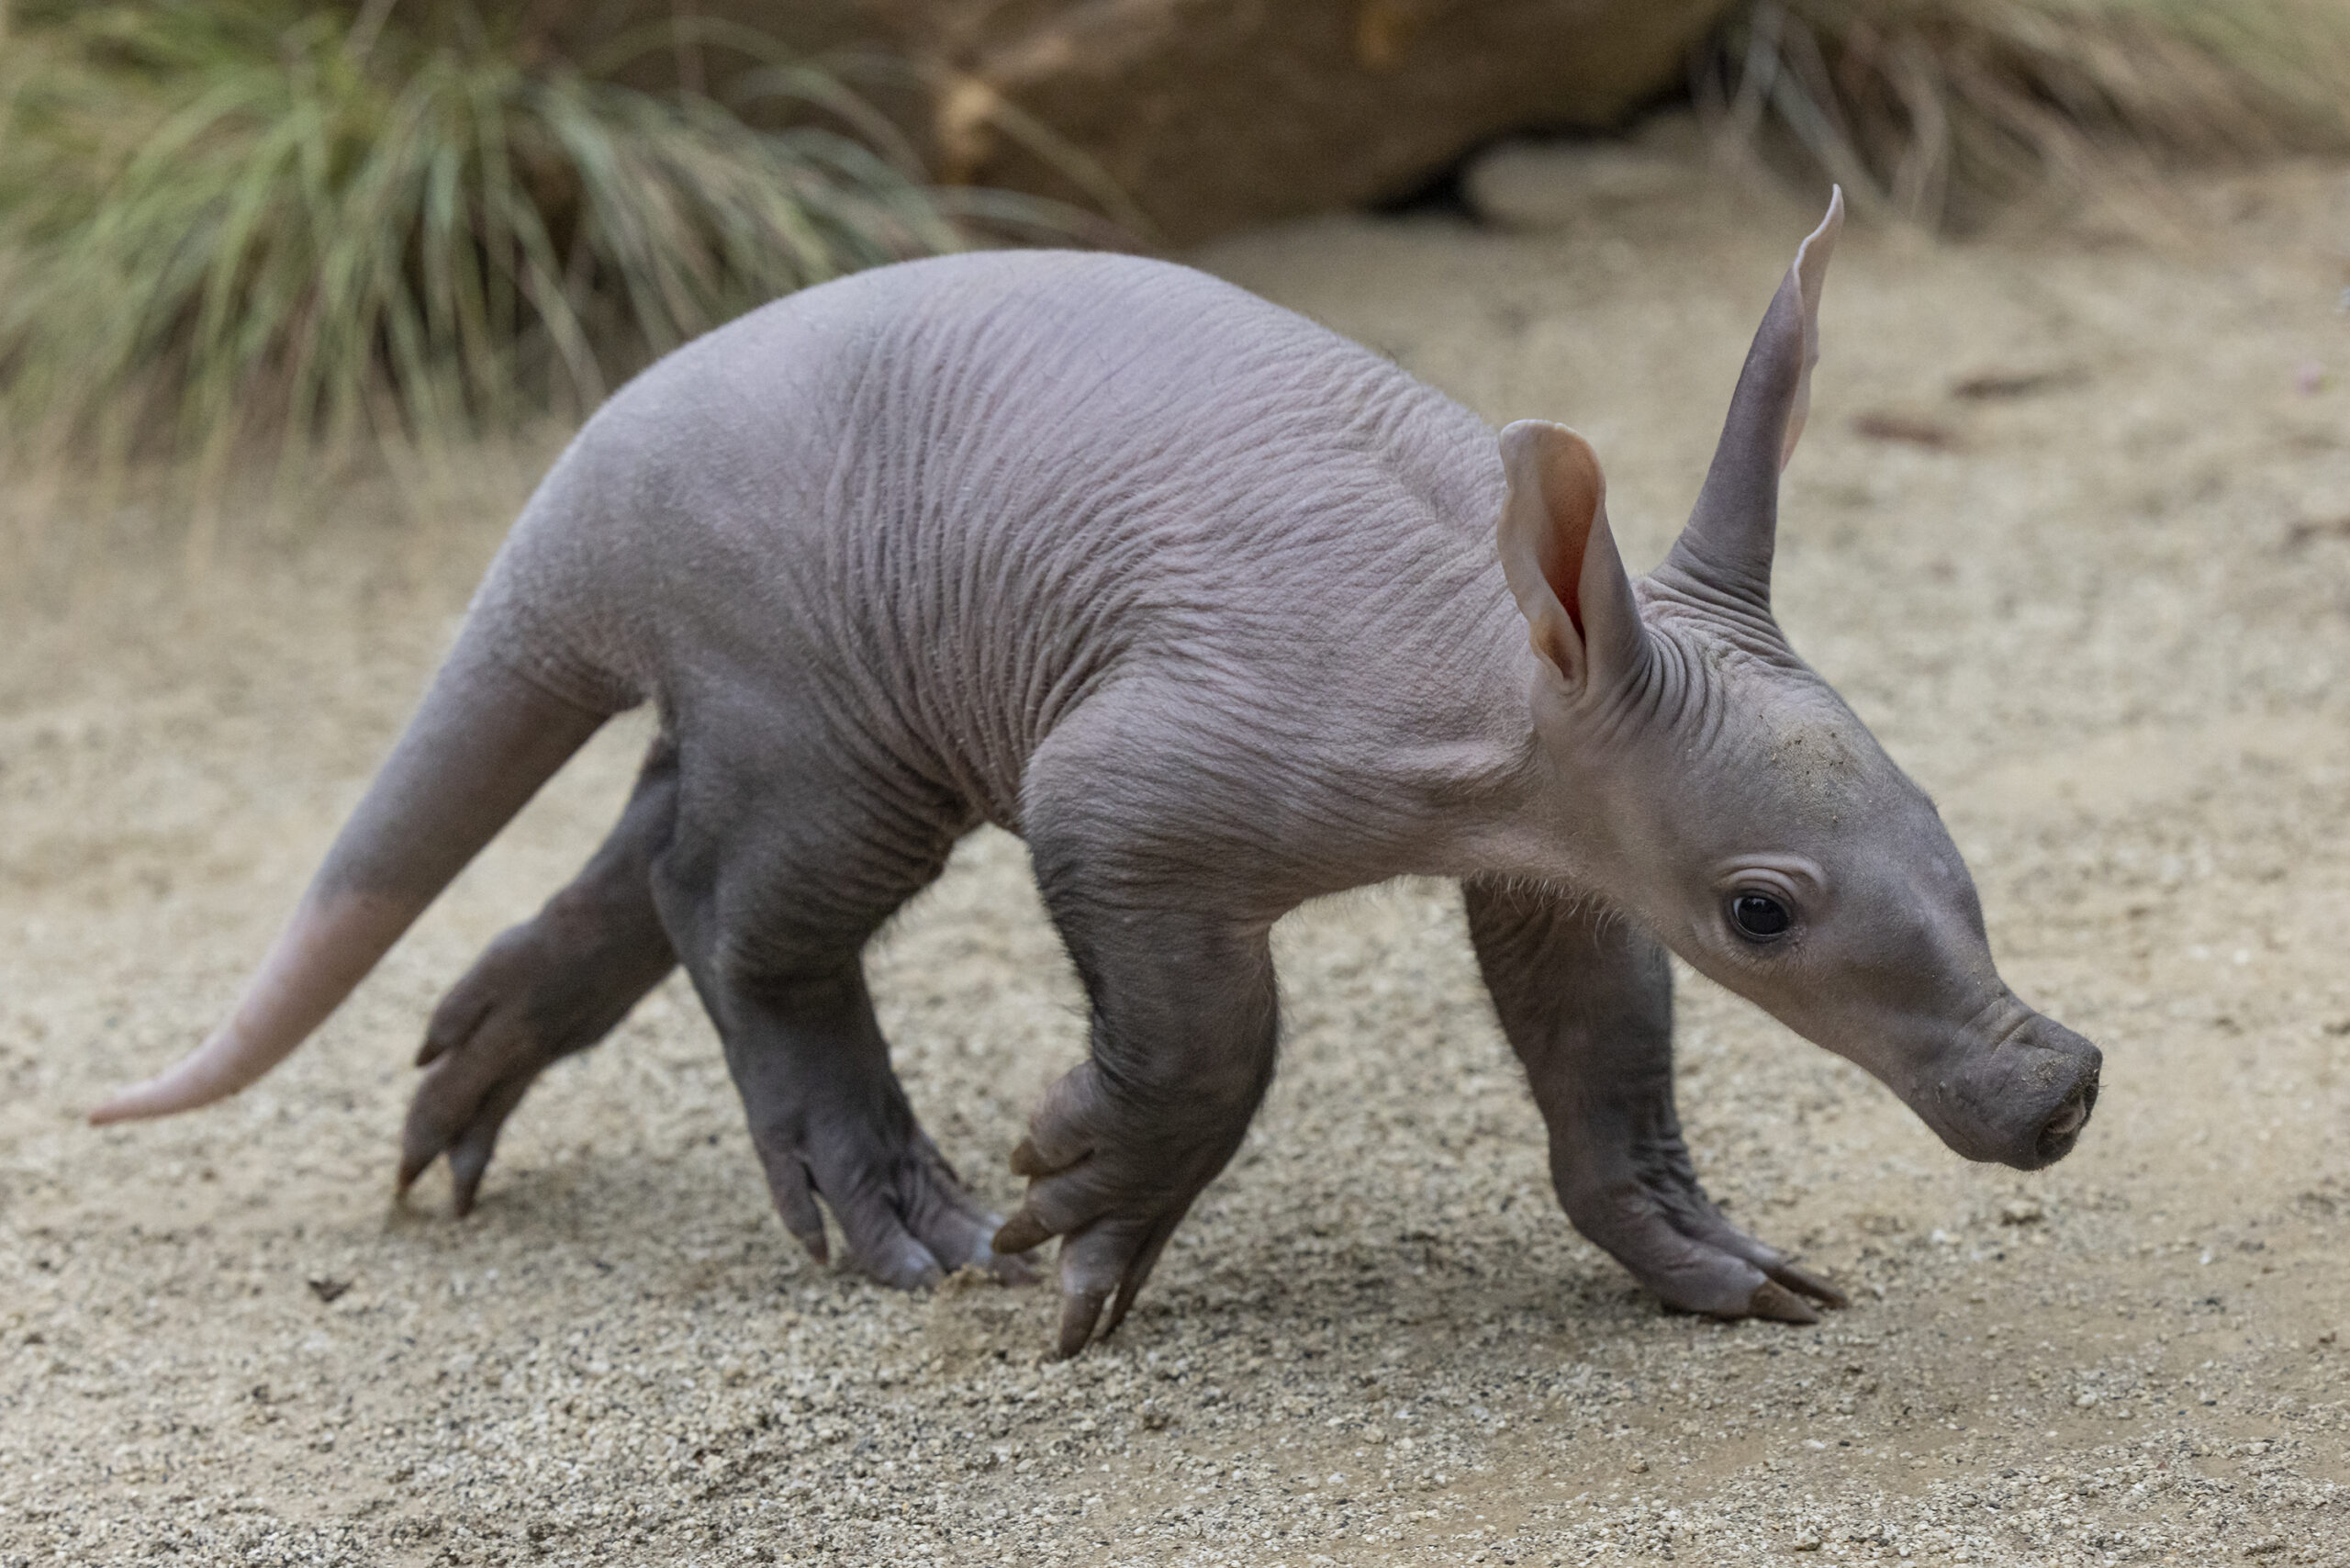 In this photo released by the San Diego Zoo Wildlife Alliance, an aardvark cub explores her habitat at the San Diego Zoo on June 10, 2022. For the first time in more than 35 years, an aardvark pup has been born at the zoo. The female, which has not yet been named, was born May 10. Zookeepers say she is doing well and that her mother, Zola, is caring and attentive. (Ken Bohn/San Diego Zoo Wildlife Alliance via AP)